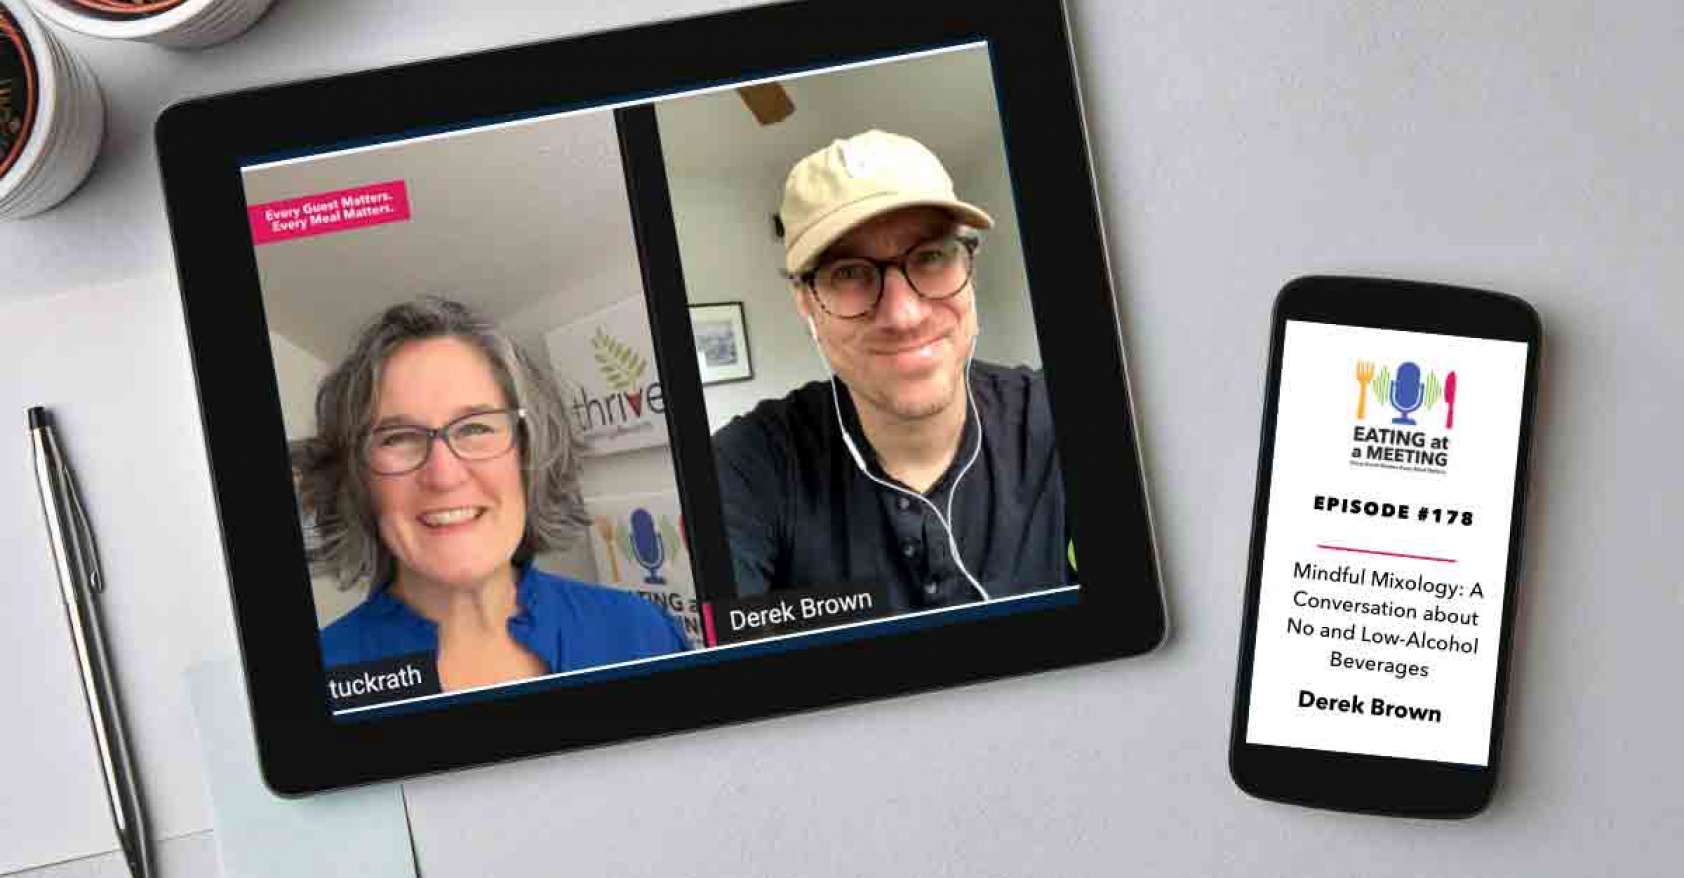 An iPad and iPhone on a table. On the iPad is a picture of a woman and a man who are on video screen. On the iPhone is the Eating at a Meeting podcast logo with Episode #177 Mindful Mixology with Derek Brown.